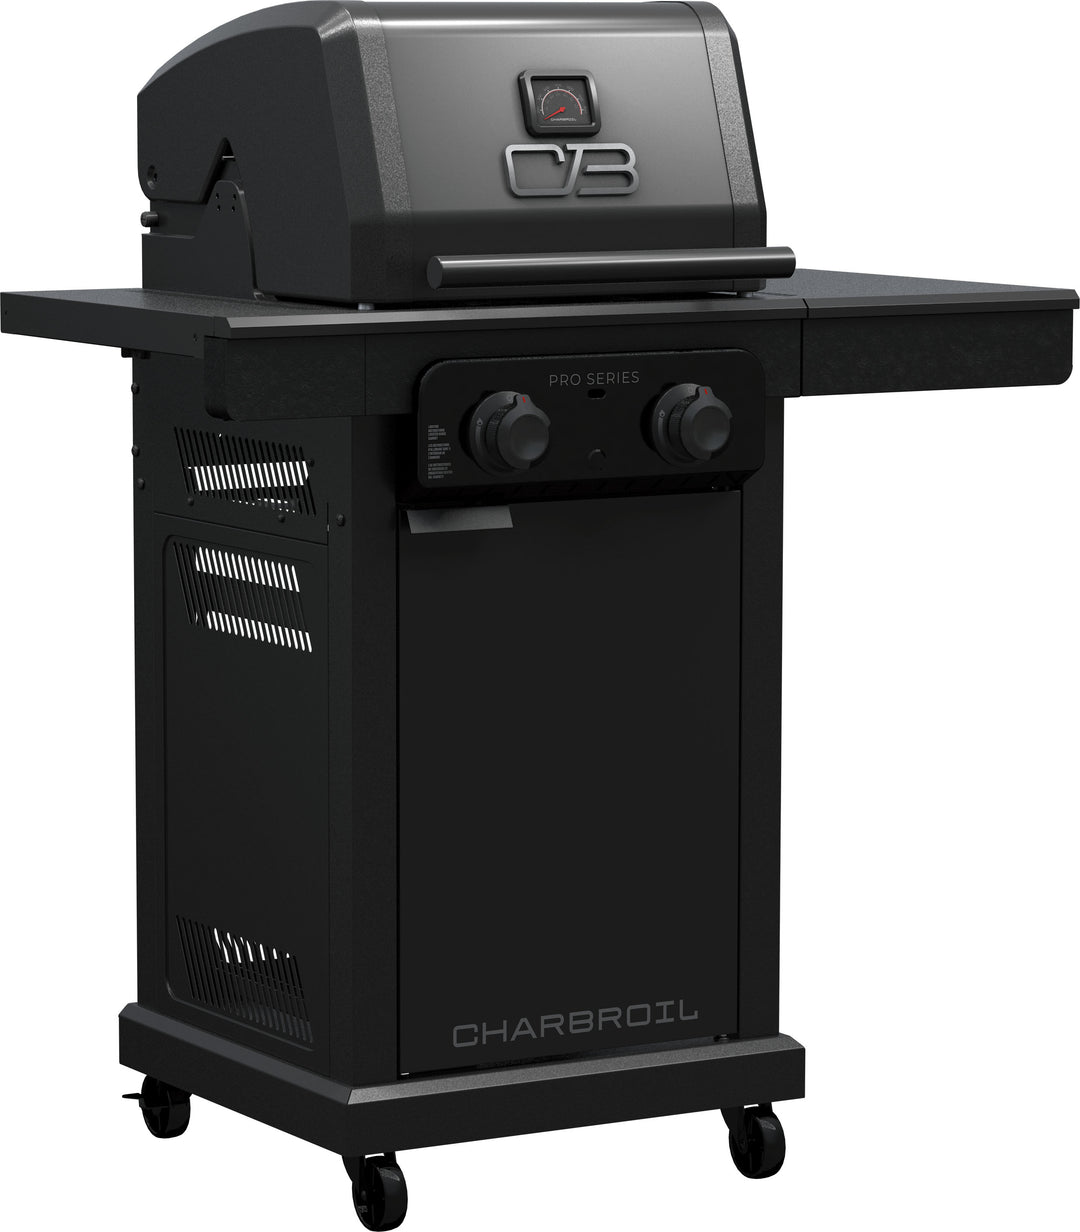 Char-Broil - Pro Series with Amplifire™ Infrared Technology 2-Burner Propane Gas Grill Cabinet, 463676724 - Black_3